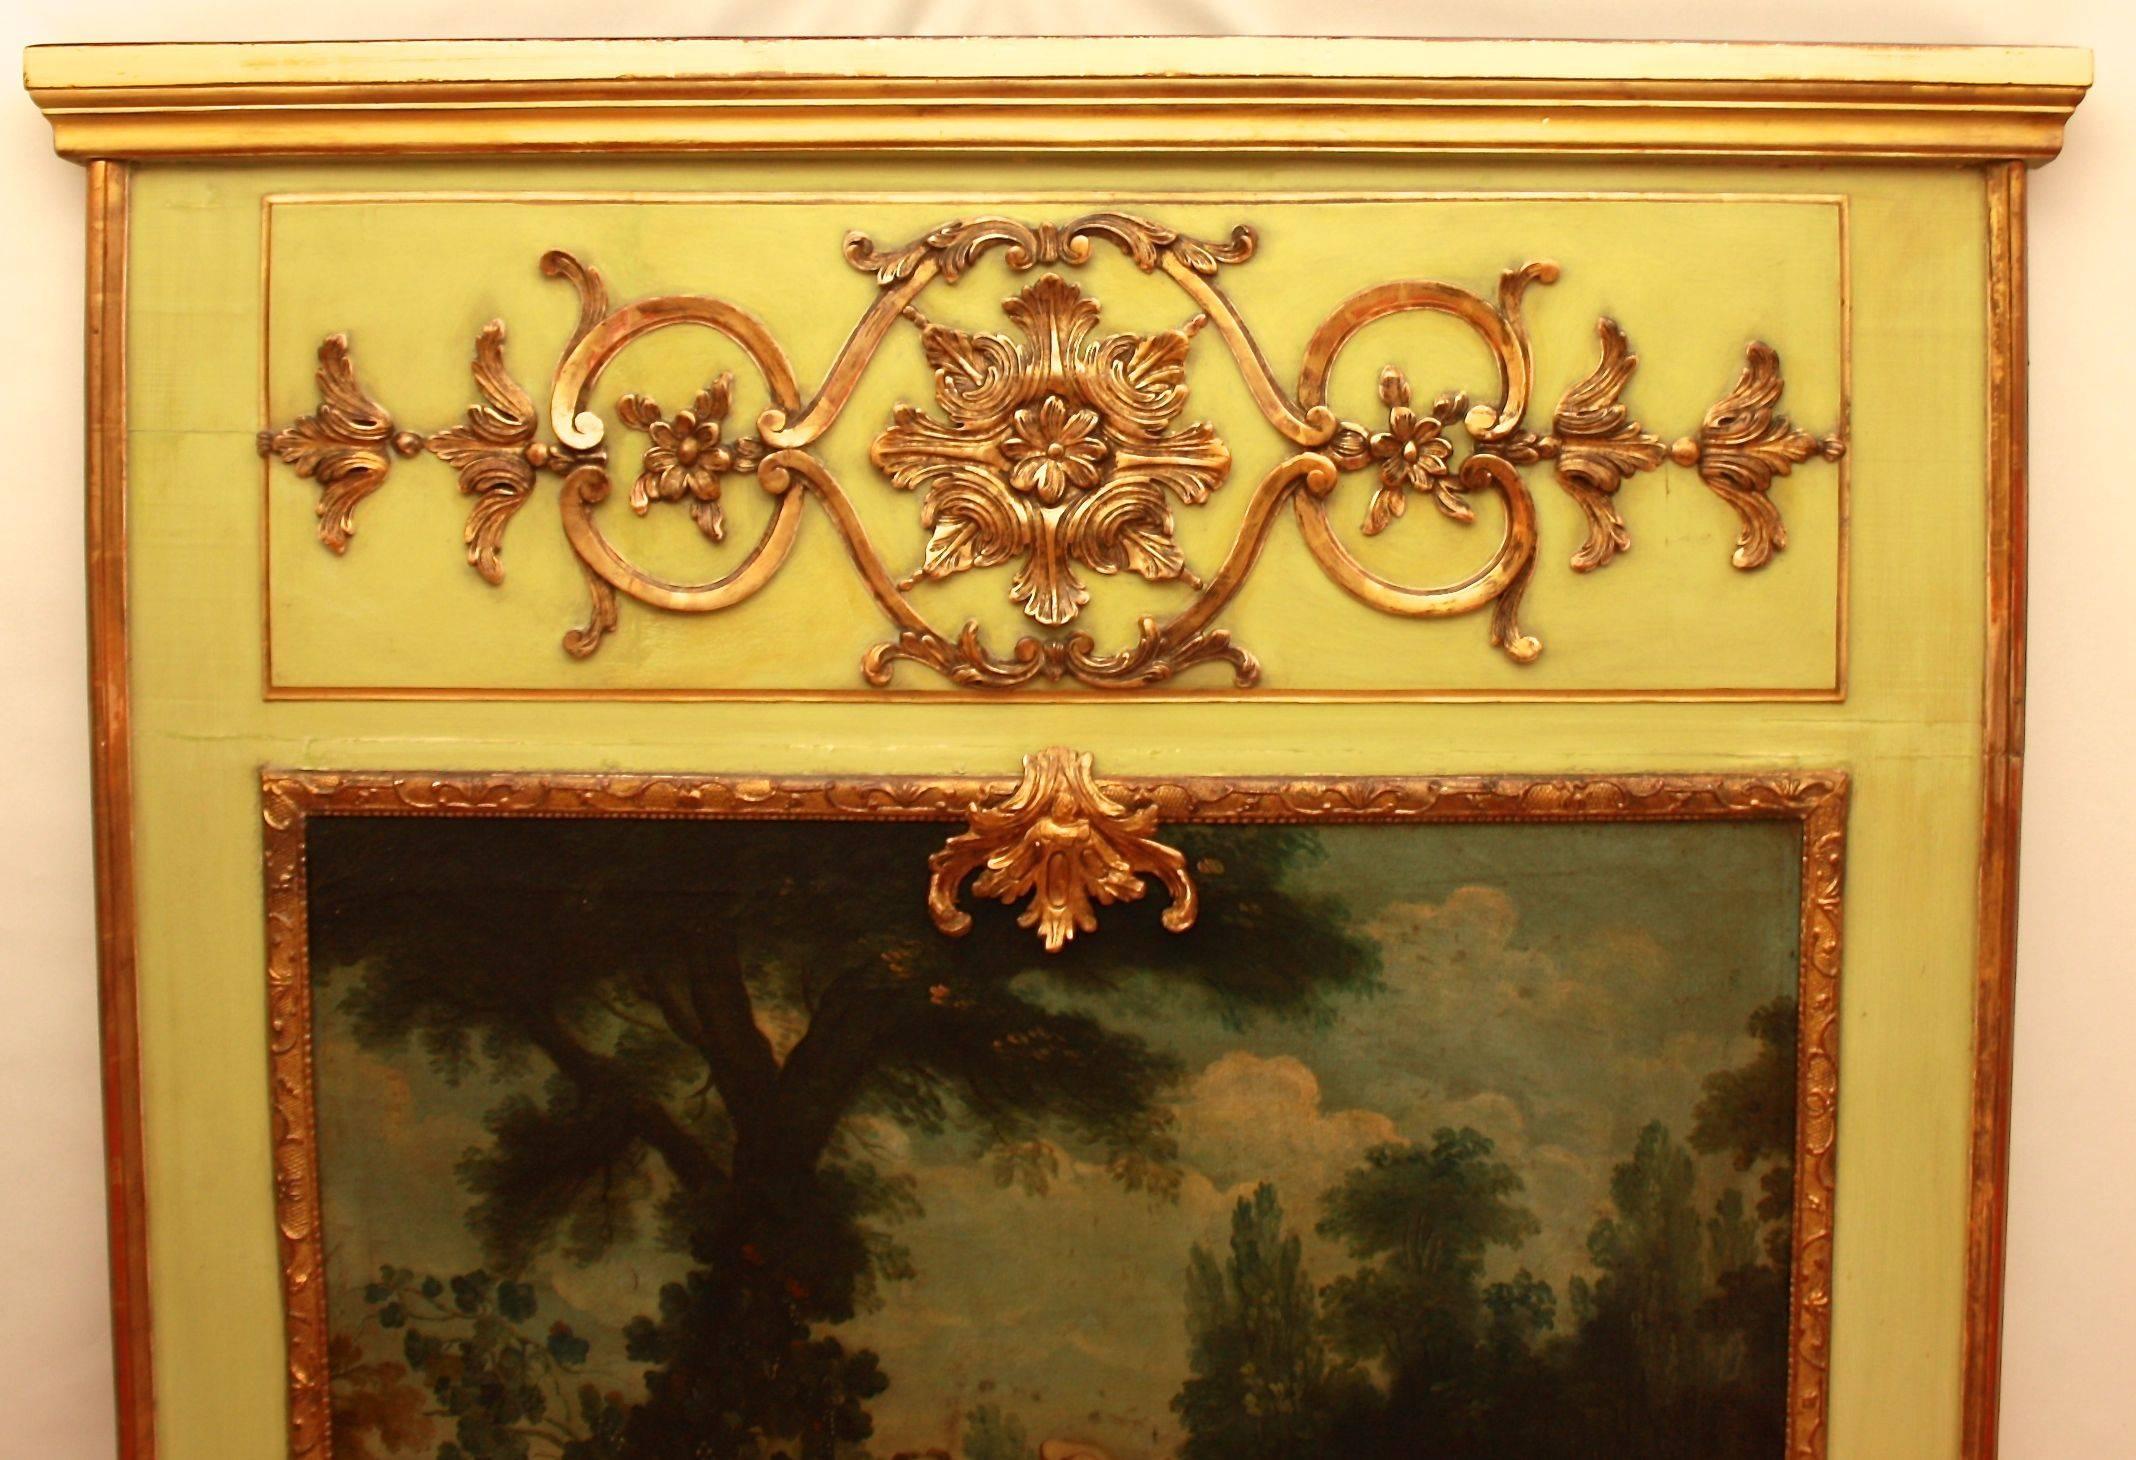 An 18th century trumeau mirror with a mirror plate framed by a giltwood border surmounted by an oil painting and a giltwood carved freeze of stylized foliate ornaments and strapwork on a light green background. 
The inset painting of a 'fe^te